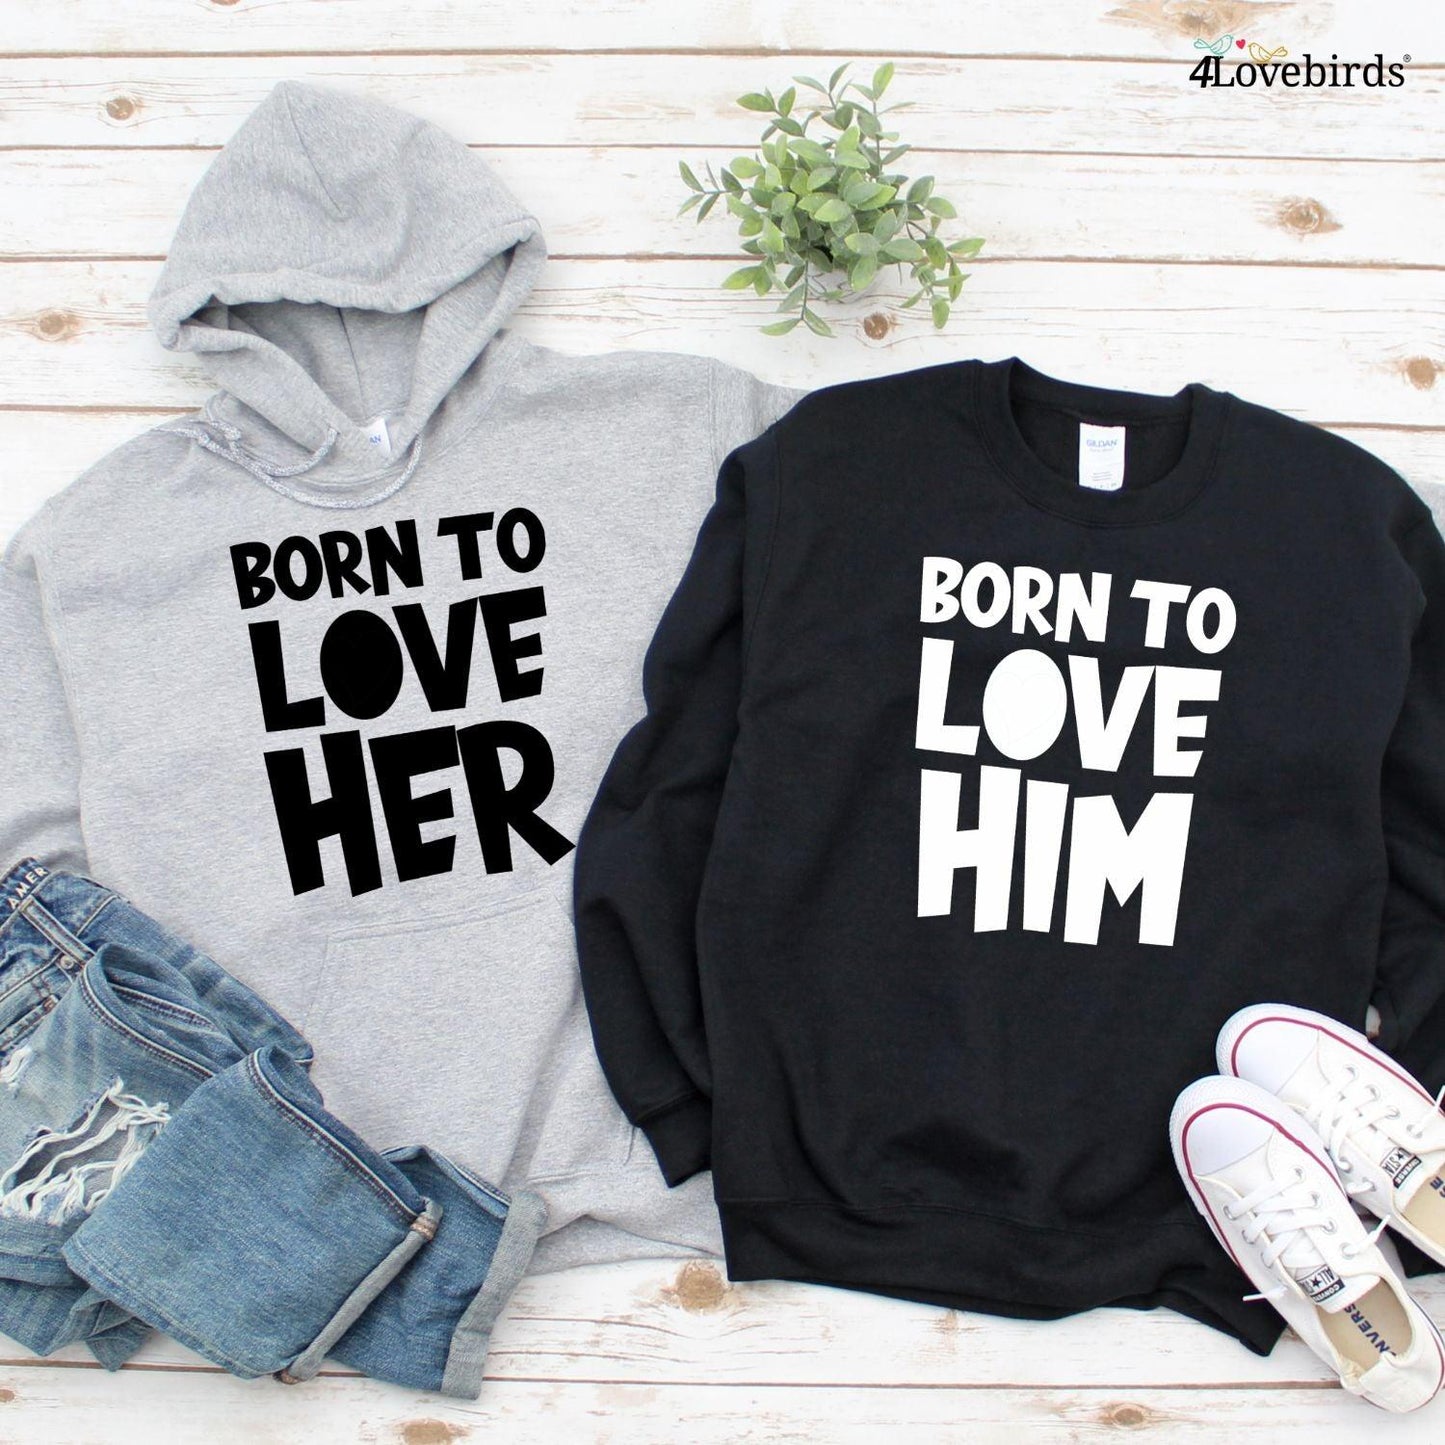 Funky Duo Deal: His and Hers Matching Outfits - Born to Love Each Other - 4Lovebirds